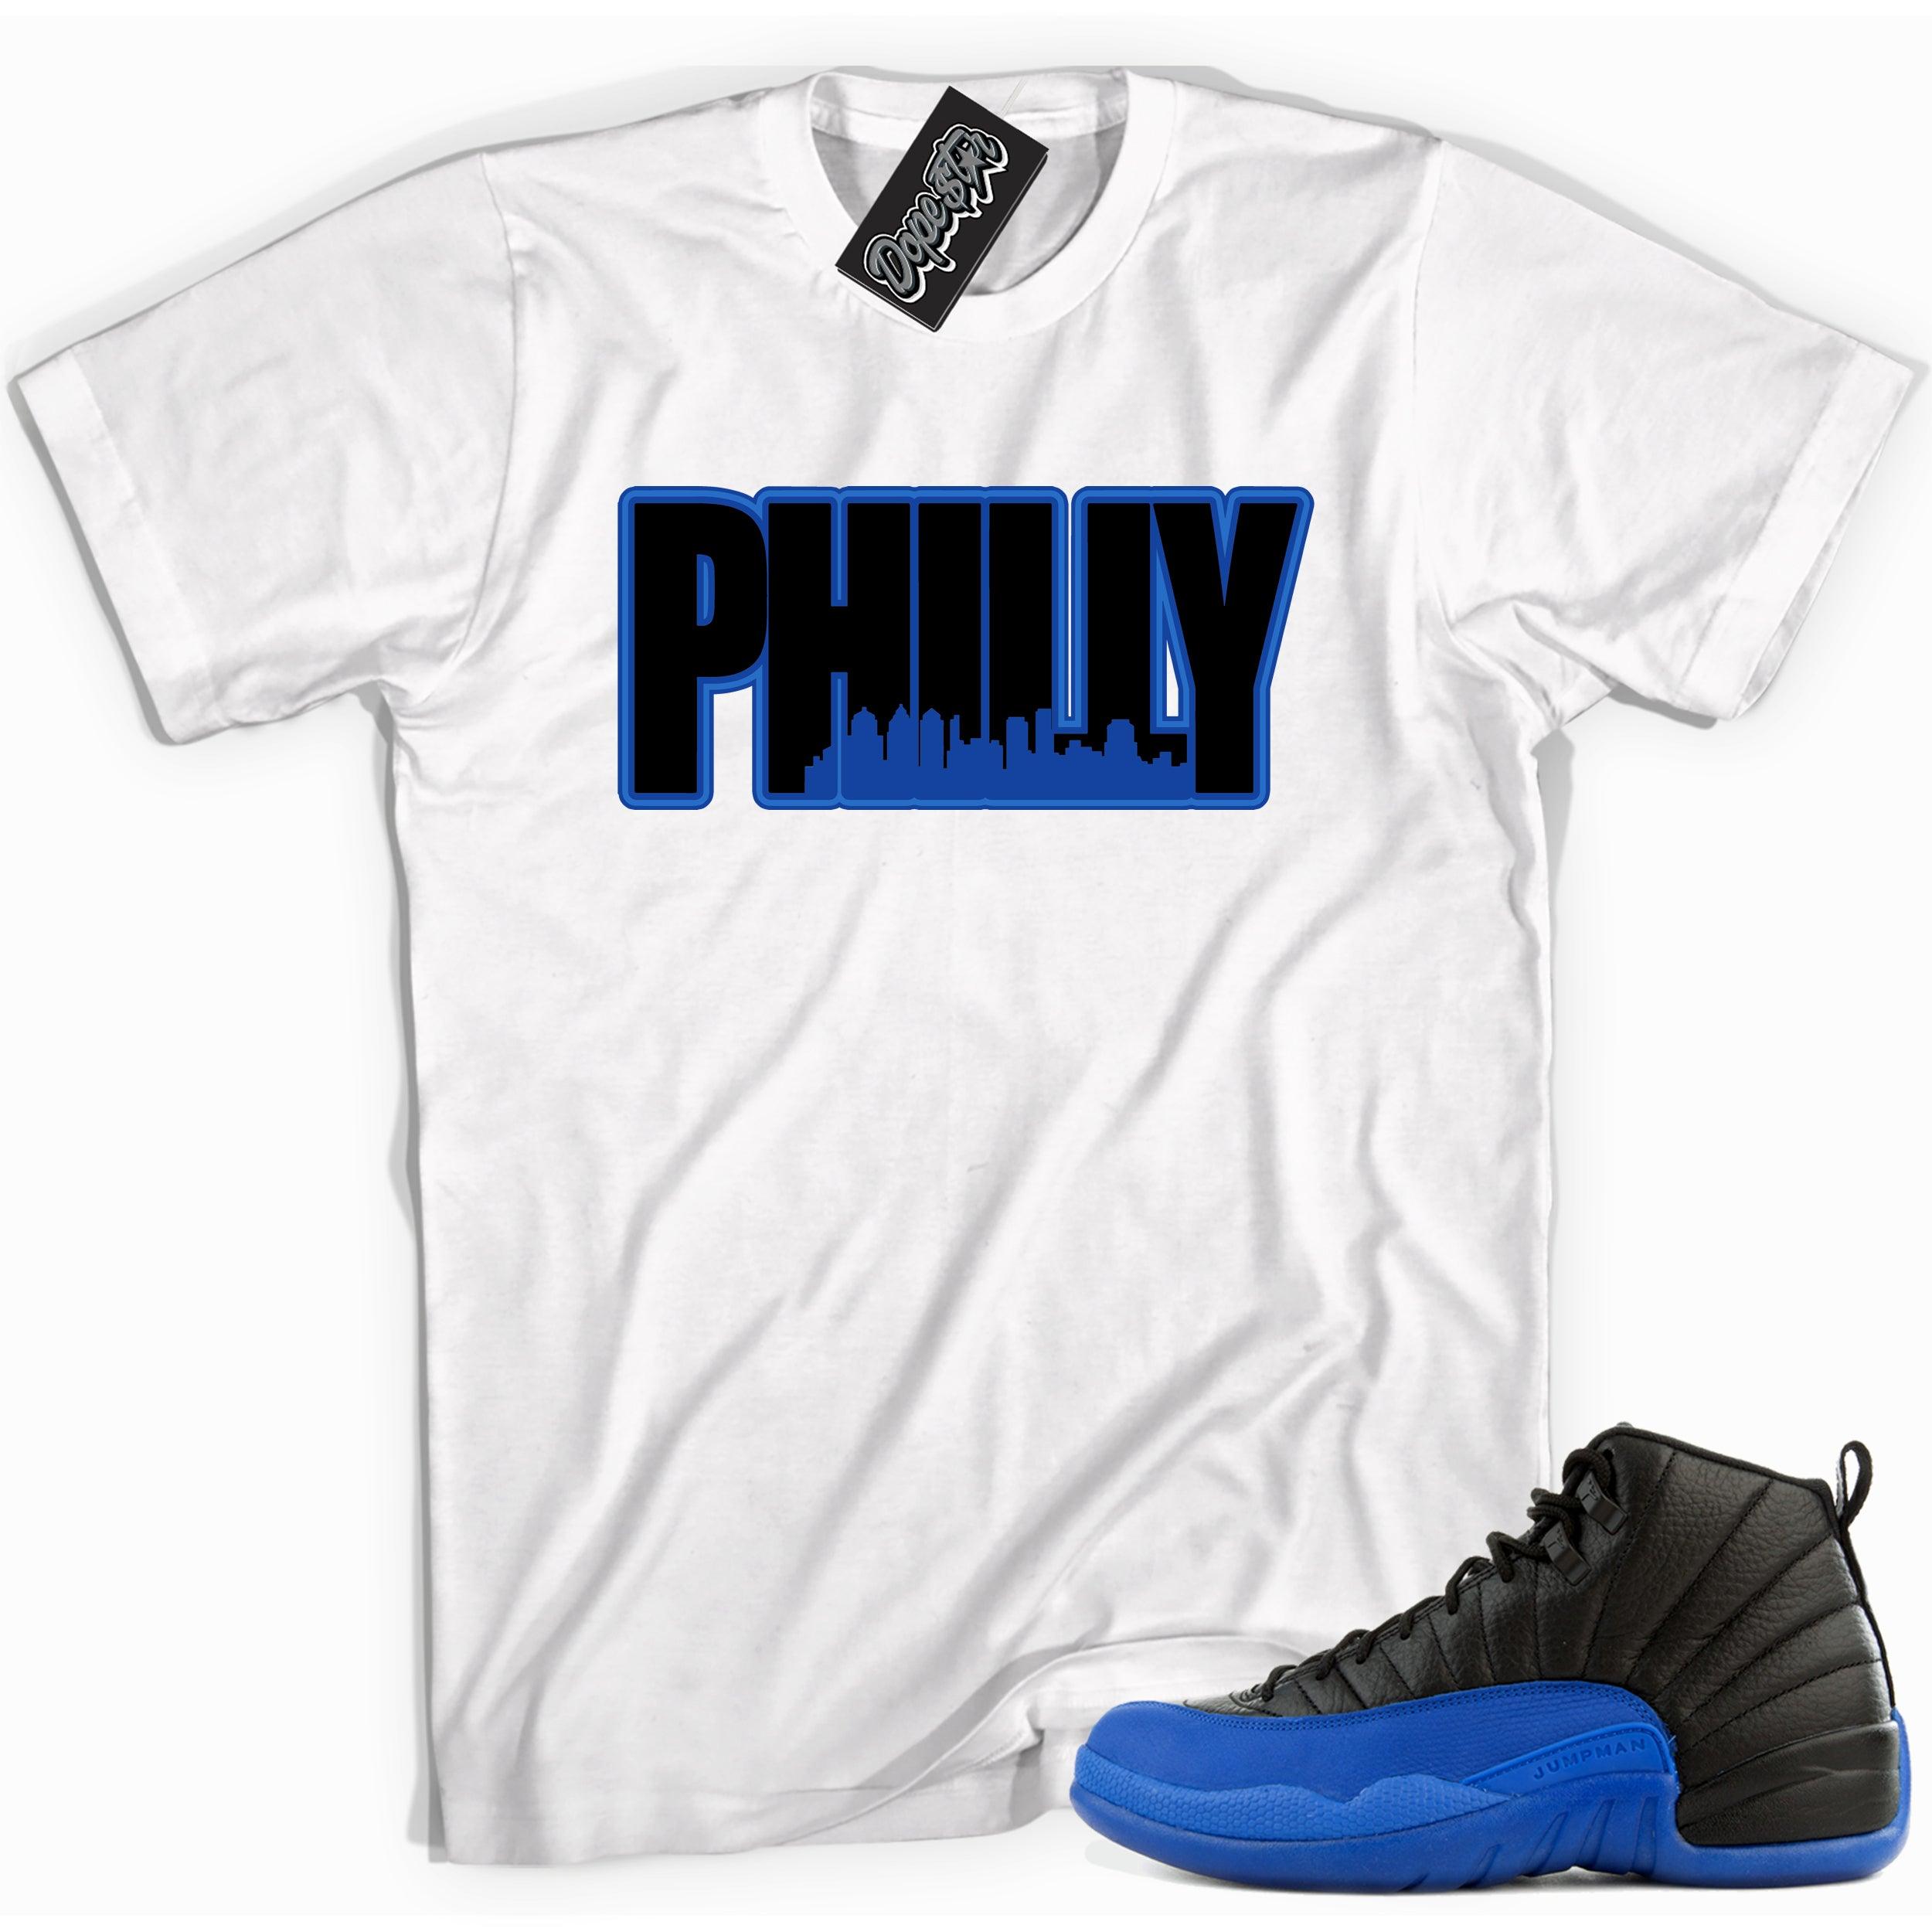 Cool white graphic tee with 'philly' print, that perfectly matches Air Jordan 12 Retro Black Game Royal sneakers.